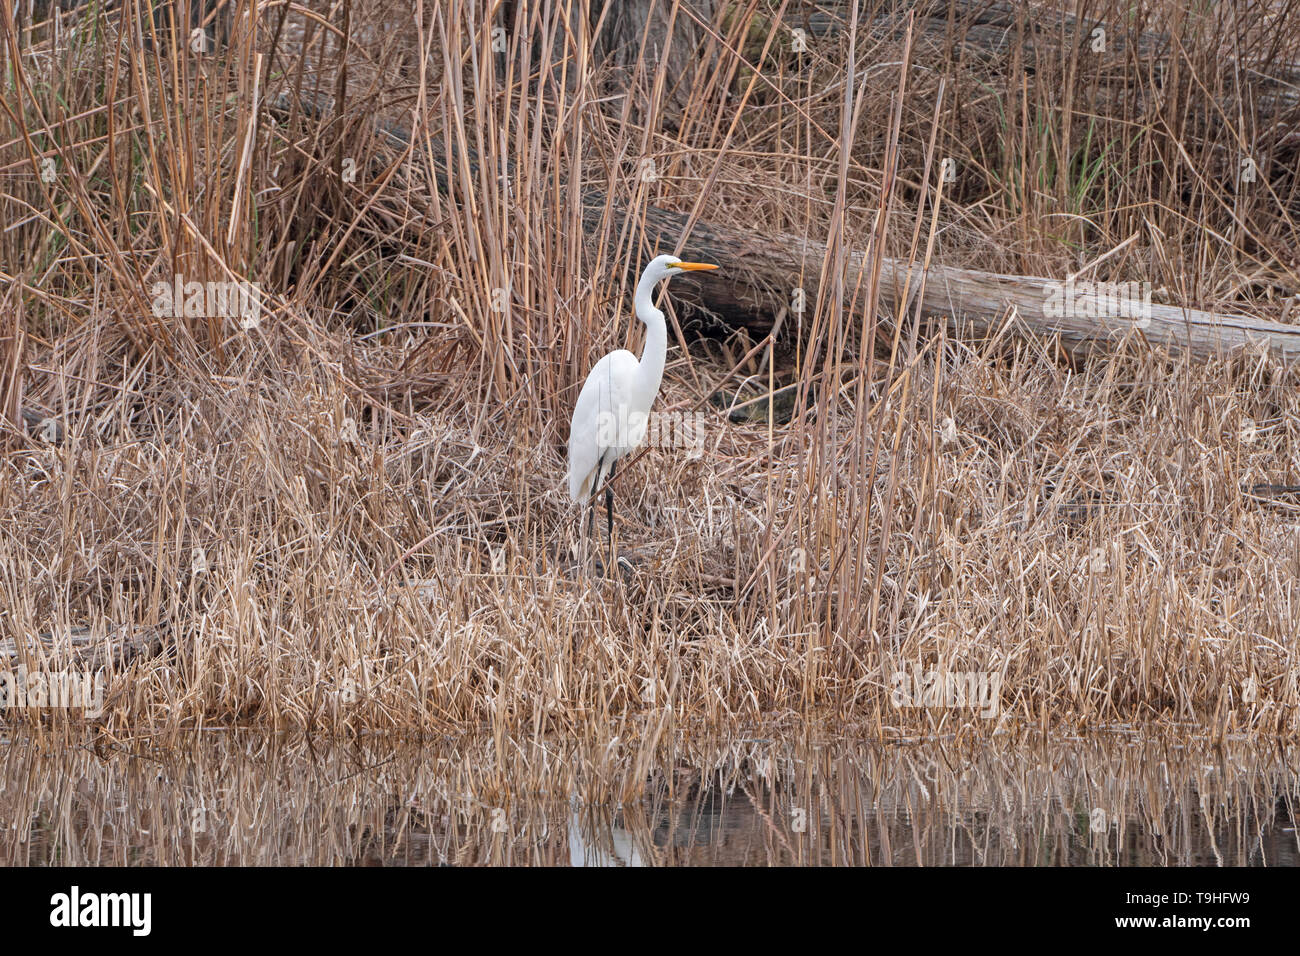 Great Egret along the Suwannee River in Stephen C. Foster State Park in the Okefenokee Swamp in Georgia Stock Photo